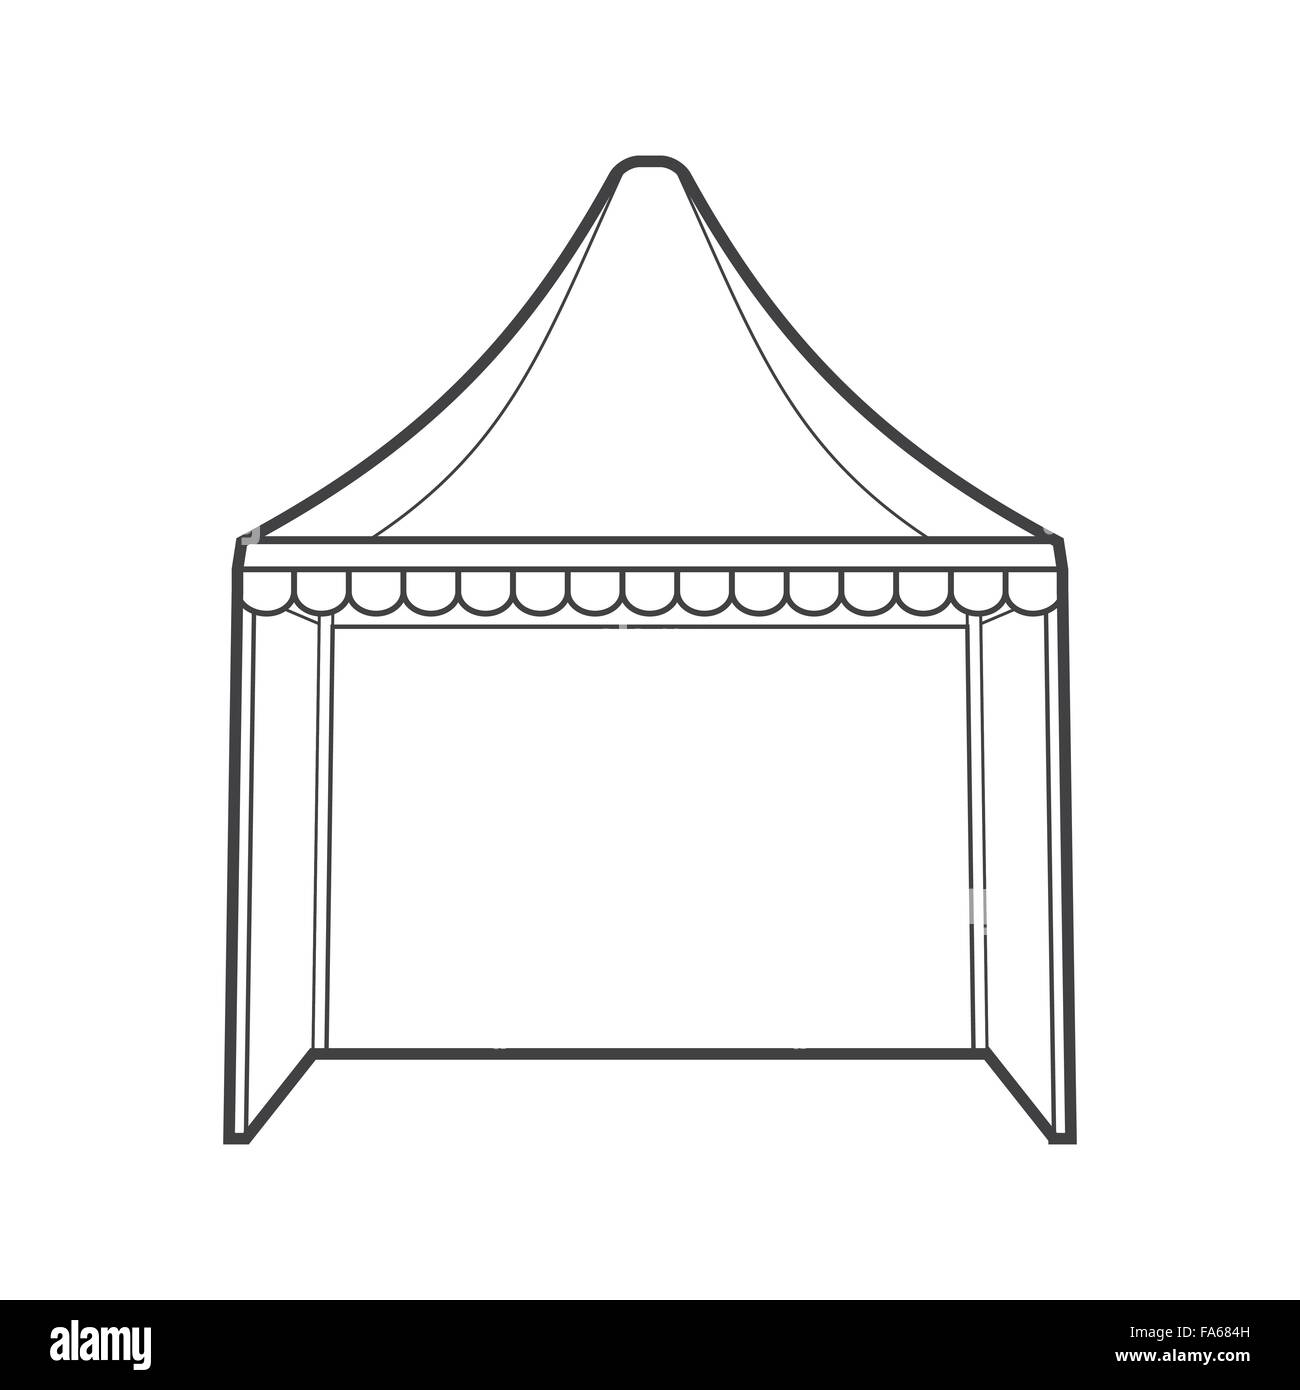 Dome tent Black and White Stock Photos & Images - Alamy